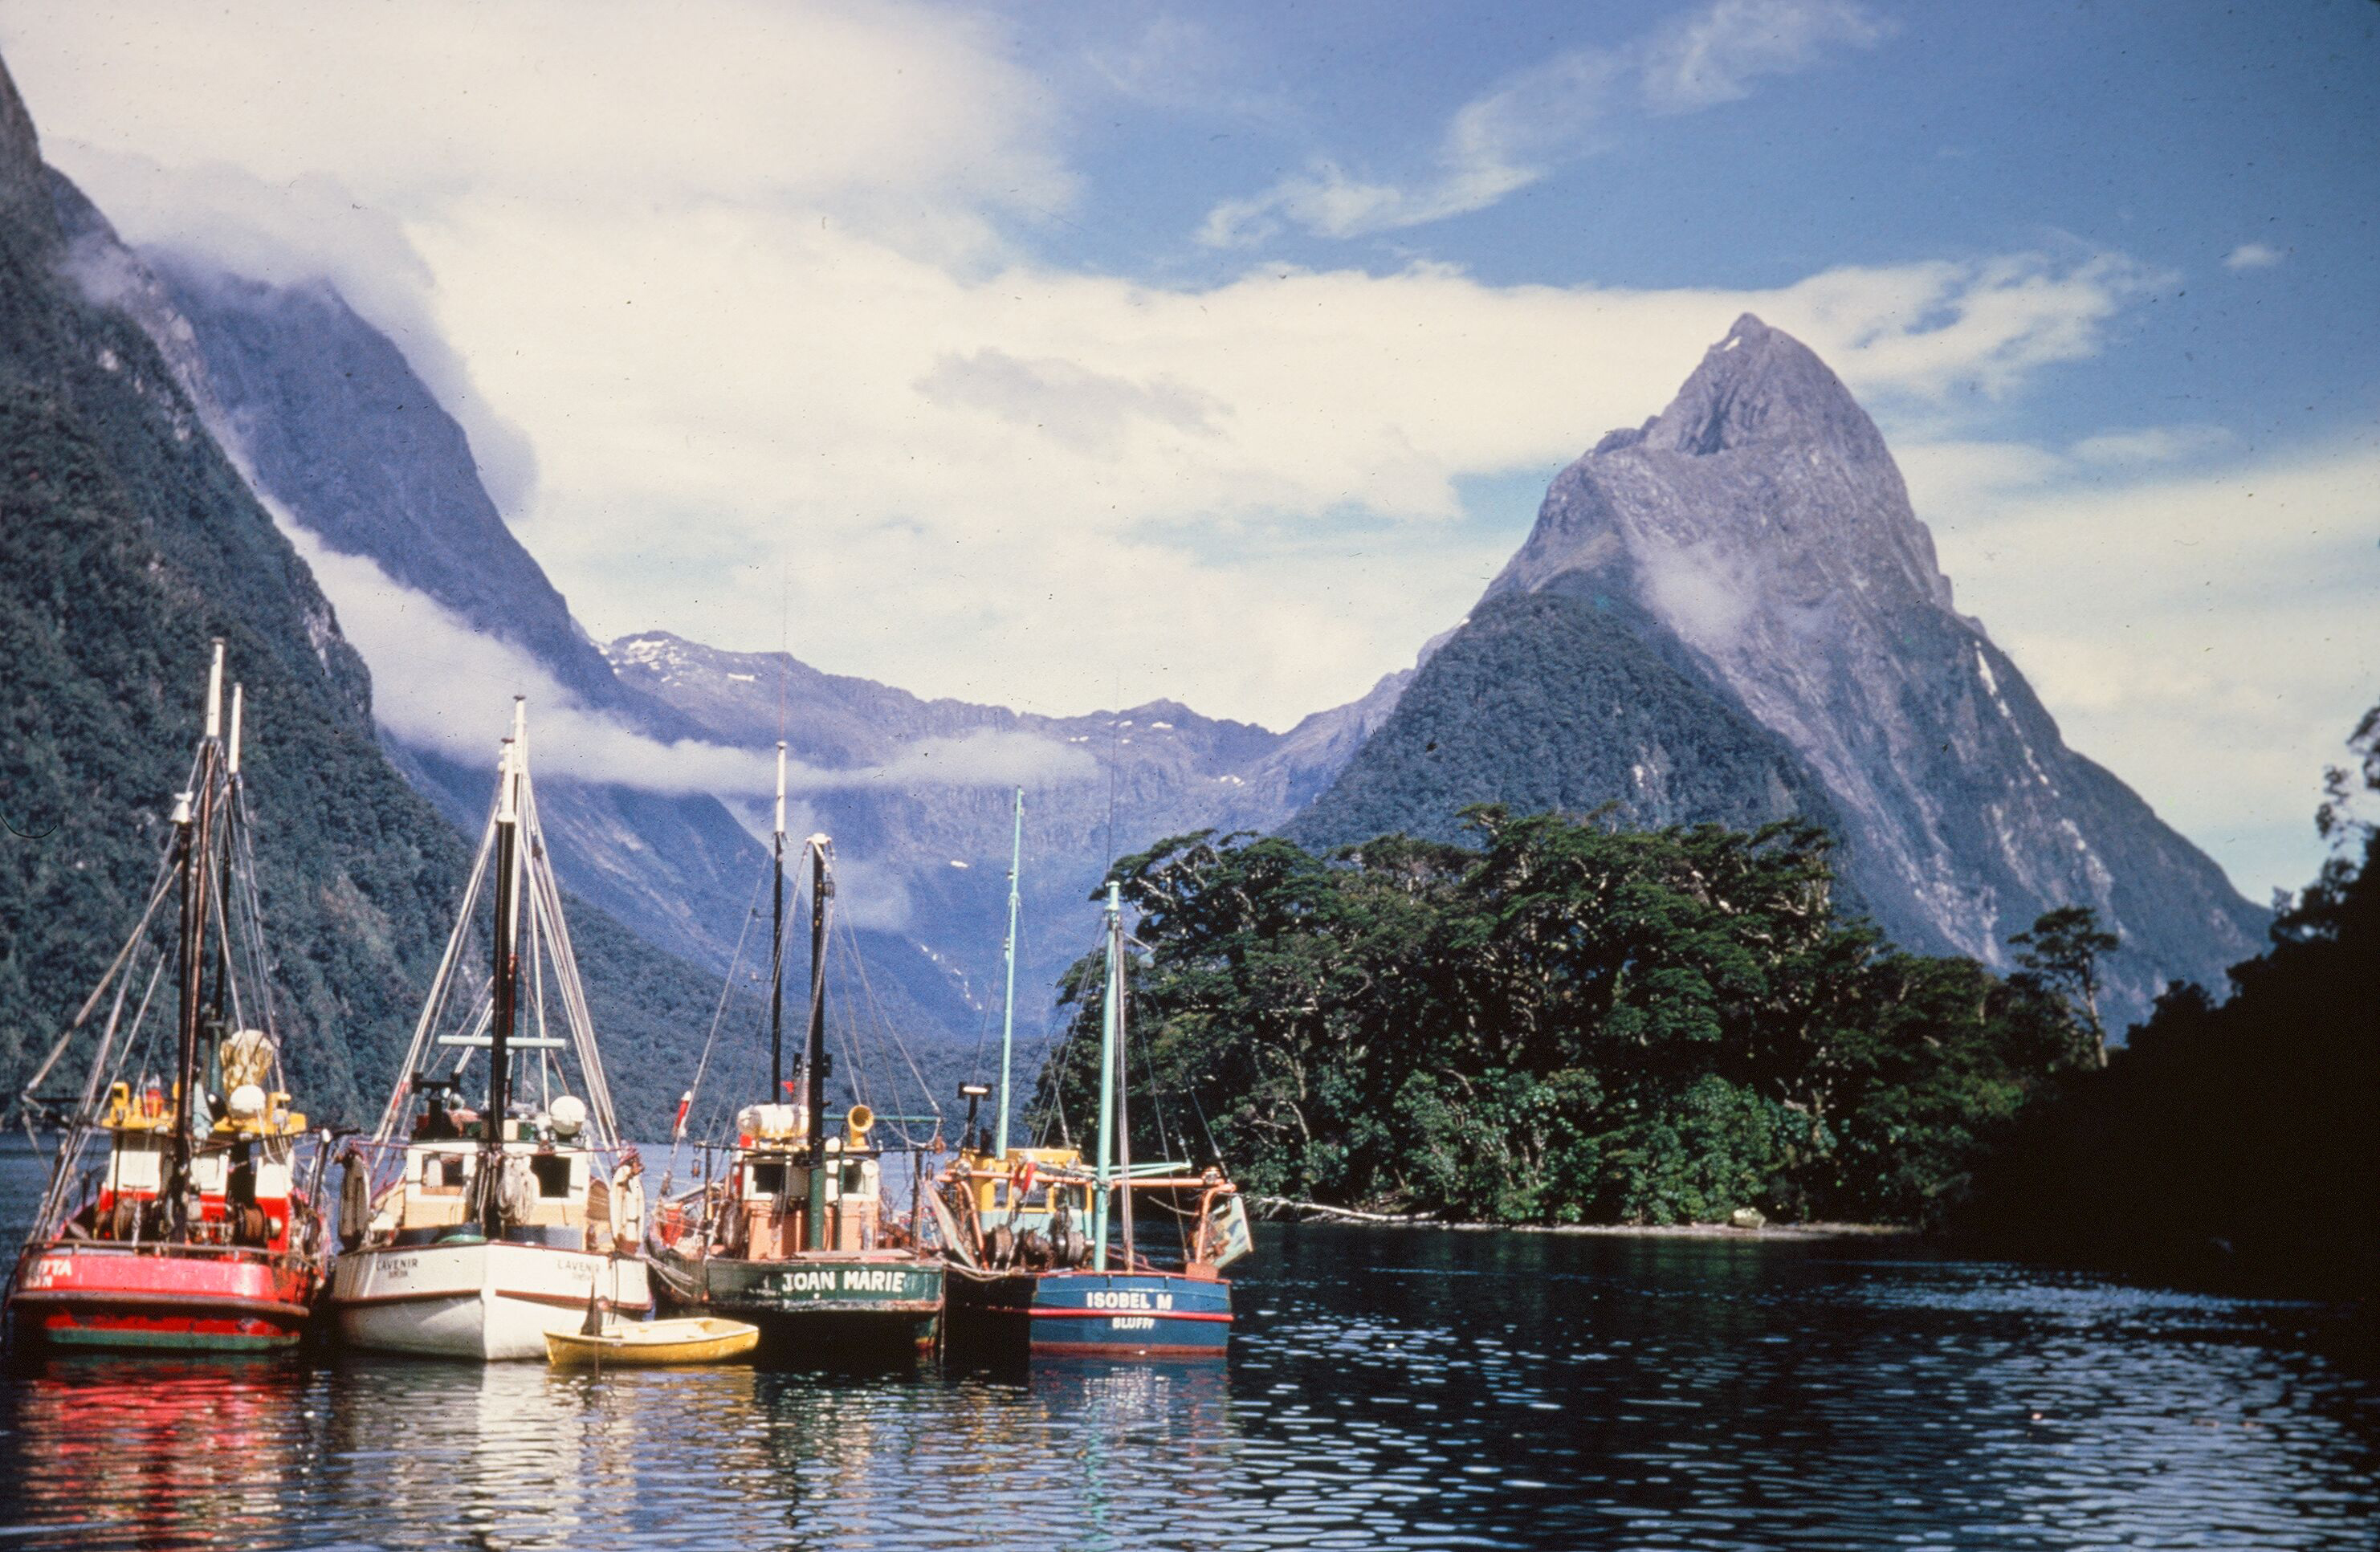 Fishing boats in New Zealand's Milford Sound.